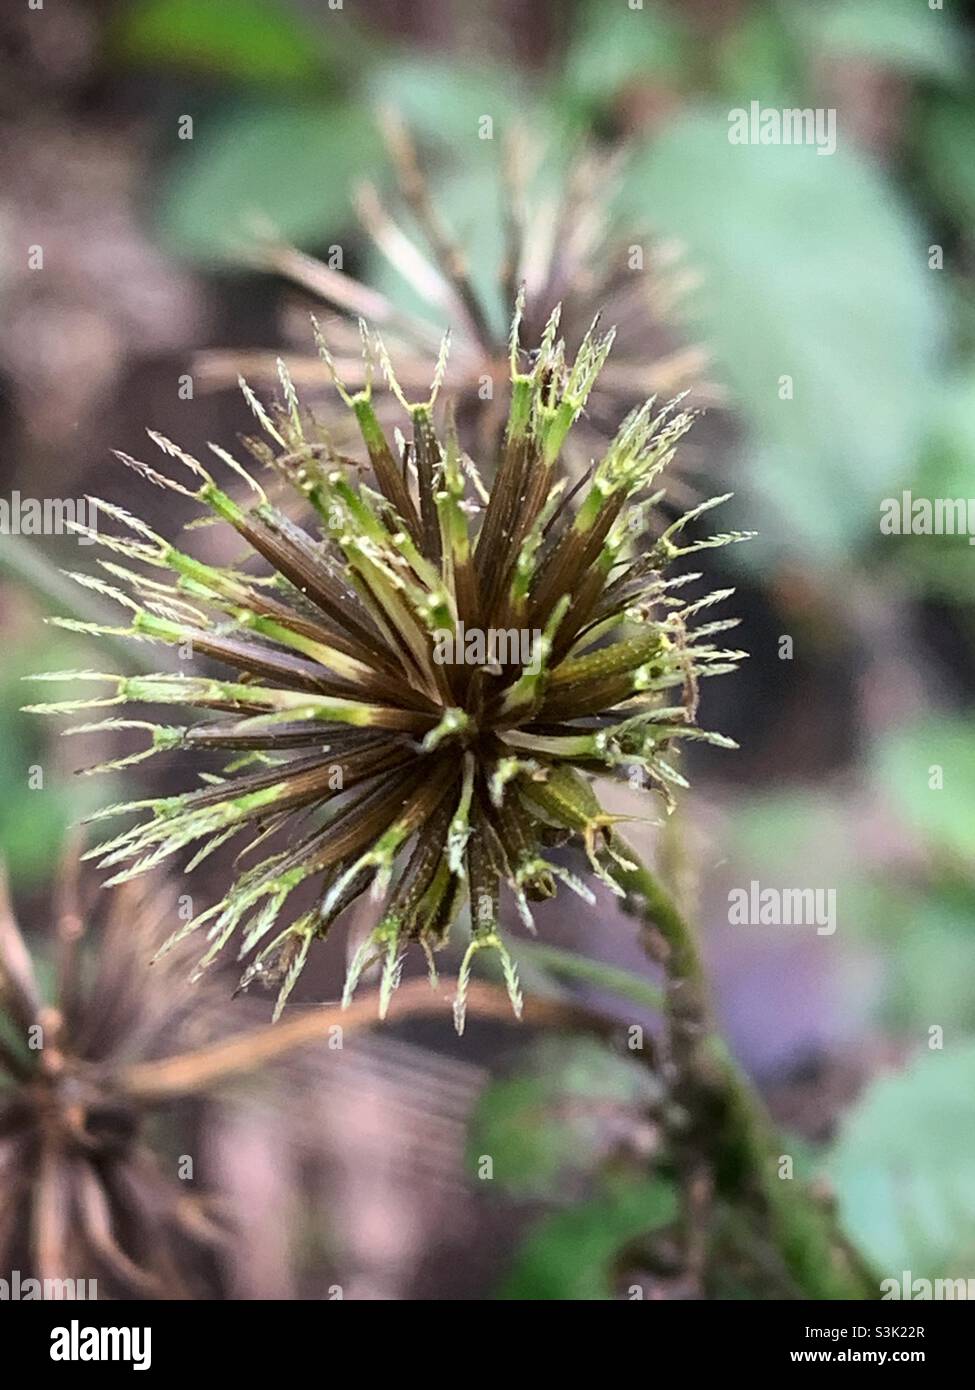 Fruit of Bidens Pilosa, also known as Cobblers Pegs, Black Jack, Farmer's Friends, Beggarticks and Spanish Needle, showing barbed awns. Stock Photo